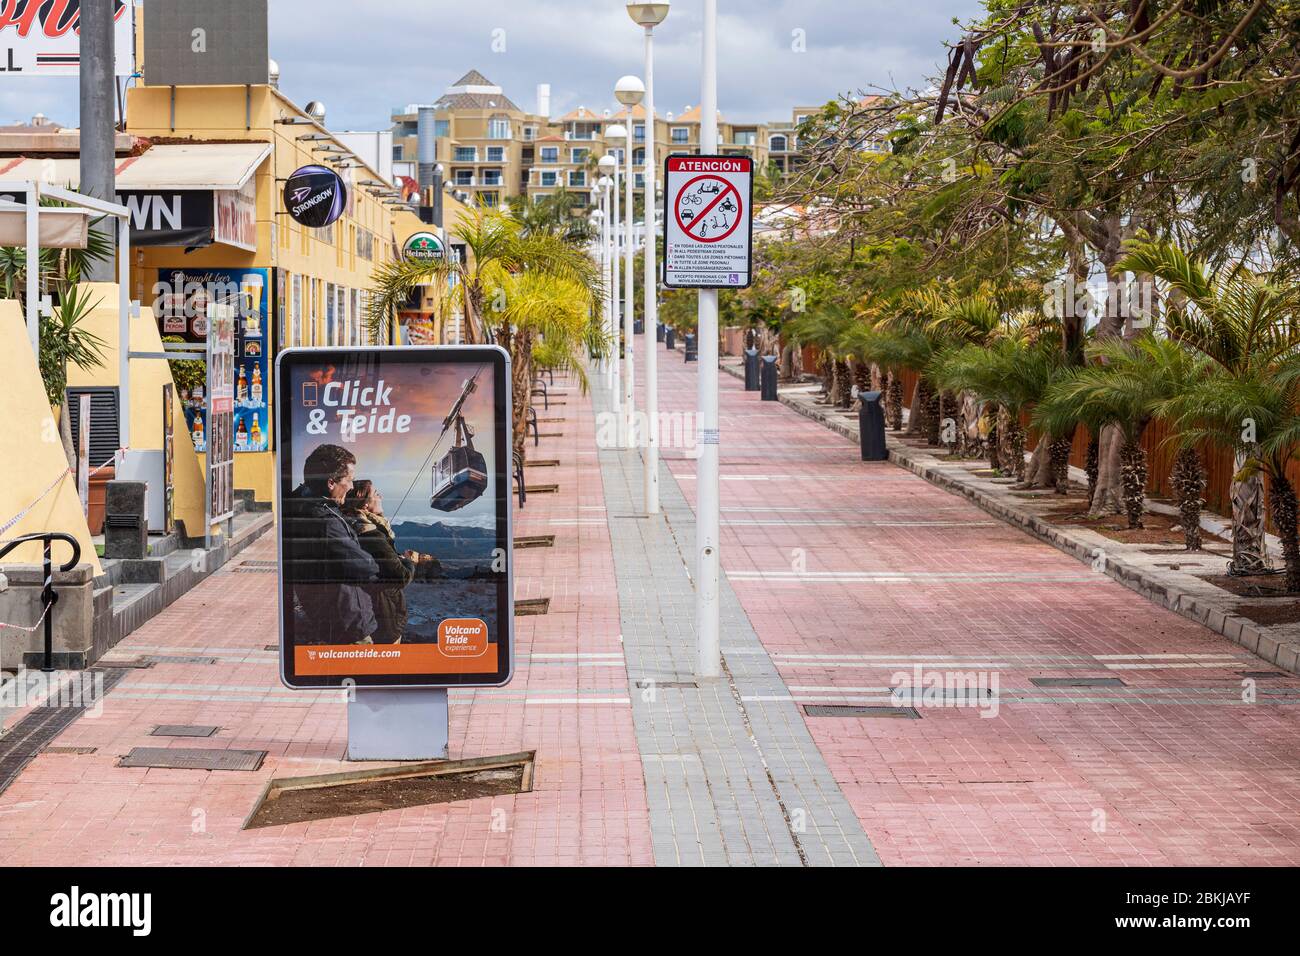 Advertising trips to Teide poster on the deserted promenade at Fanabe during the covid 19 lockdown in the tourist resort area of Costa Adeje, Tenerife Stock Photo